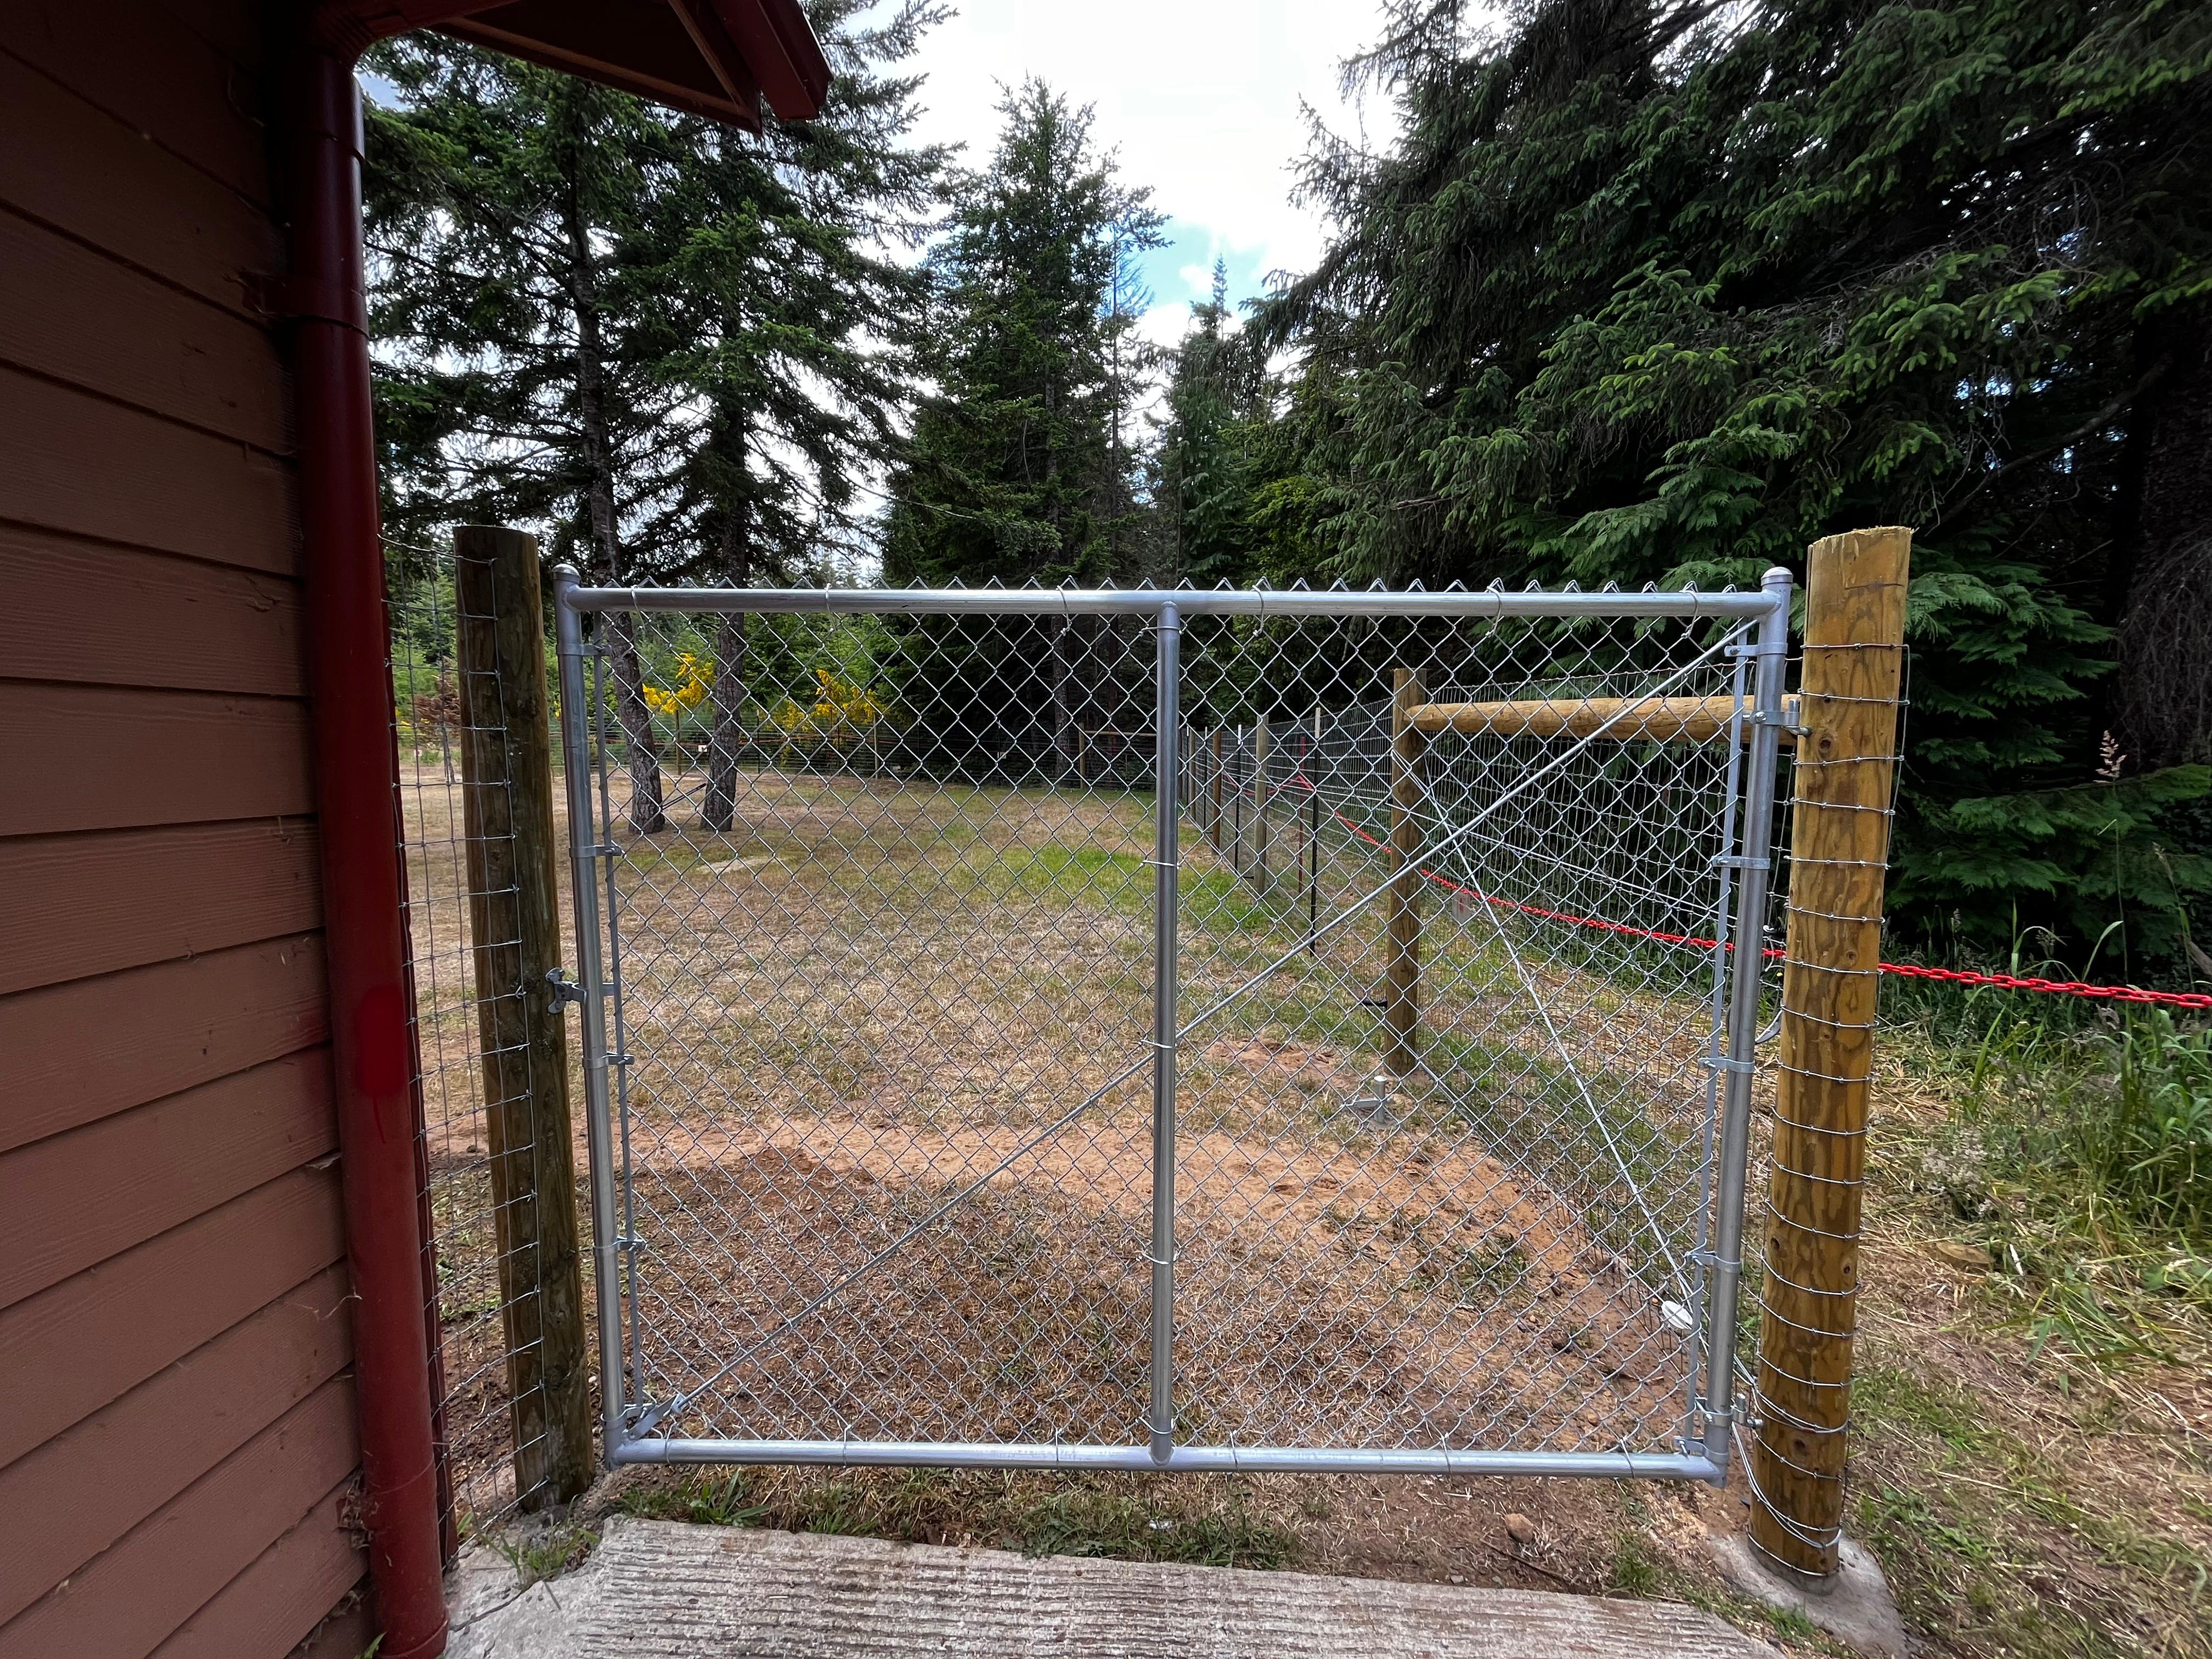 At Cleveland Fencing and Contracting, LLC, we take pride in providing high-quality fencing solutions to residential and commercial clients throughout the Coos Bay area. Contact us today to learn more and book your appointment!